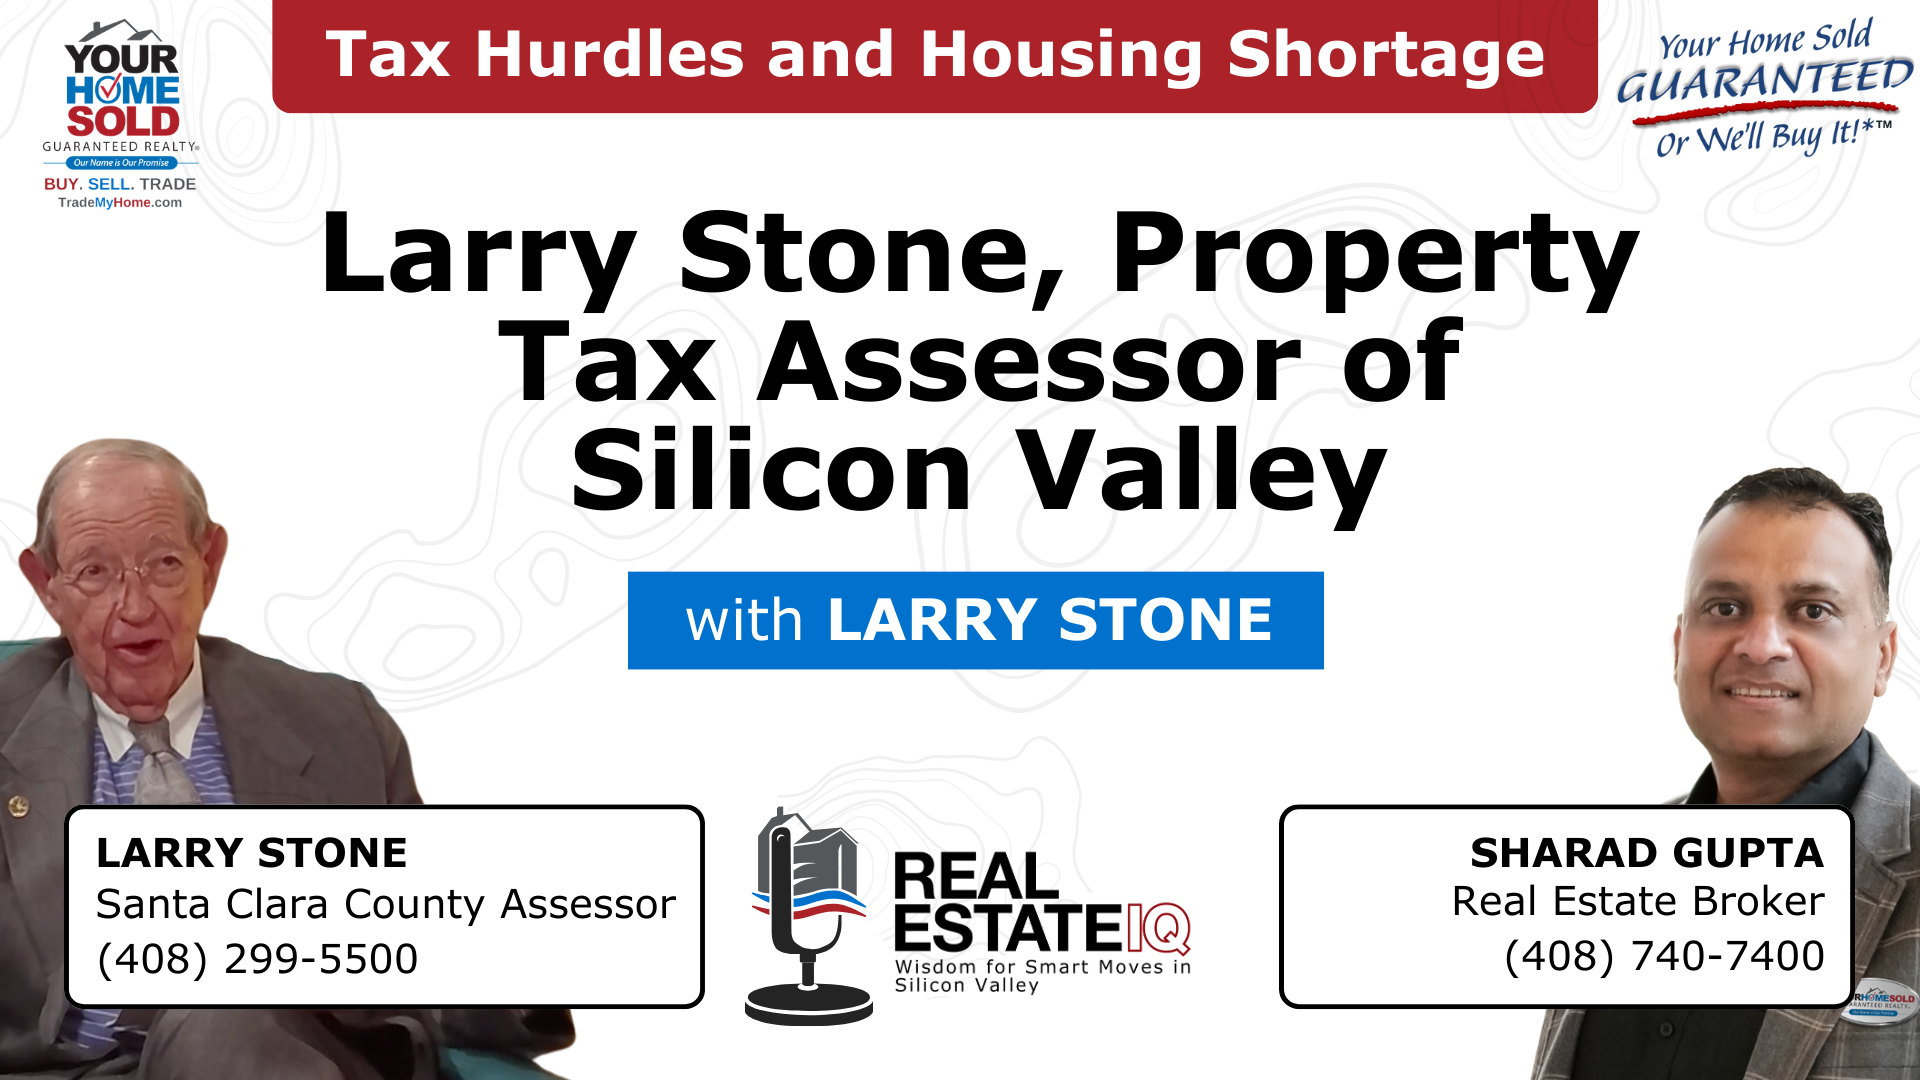 Larry Stone, Property Tax Assessor: Tax Hurdles and Housing Shortage of Silicon Valley Video